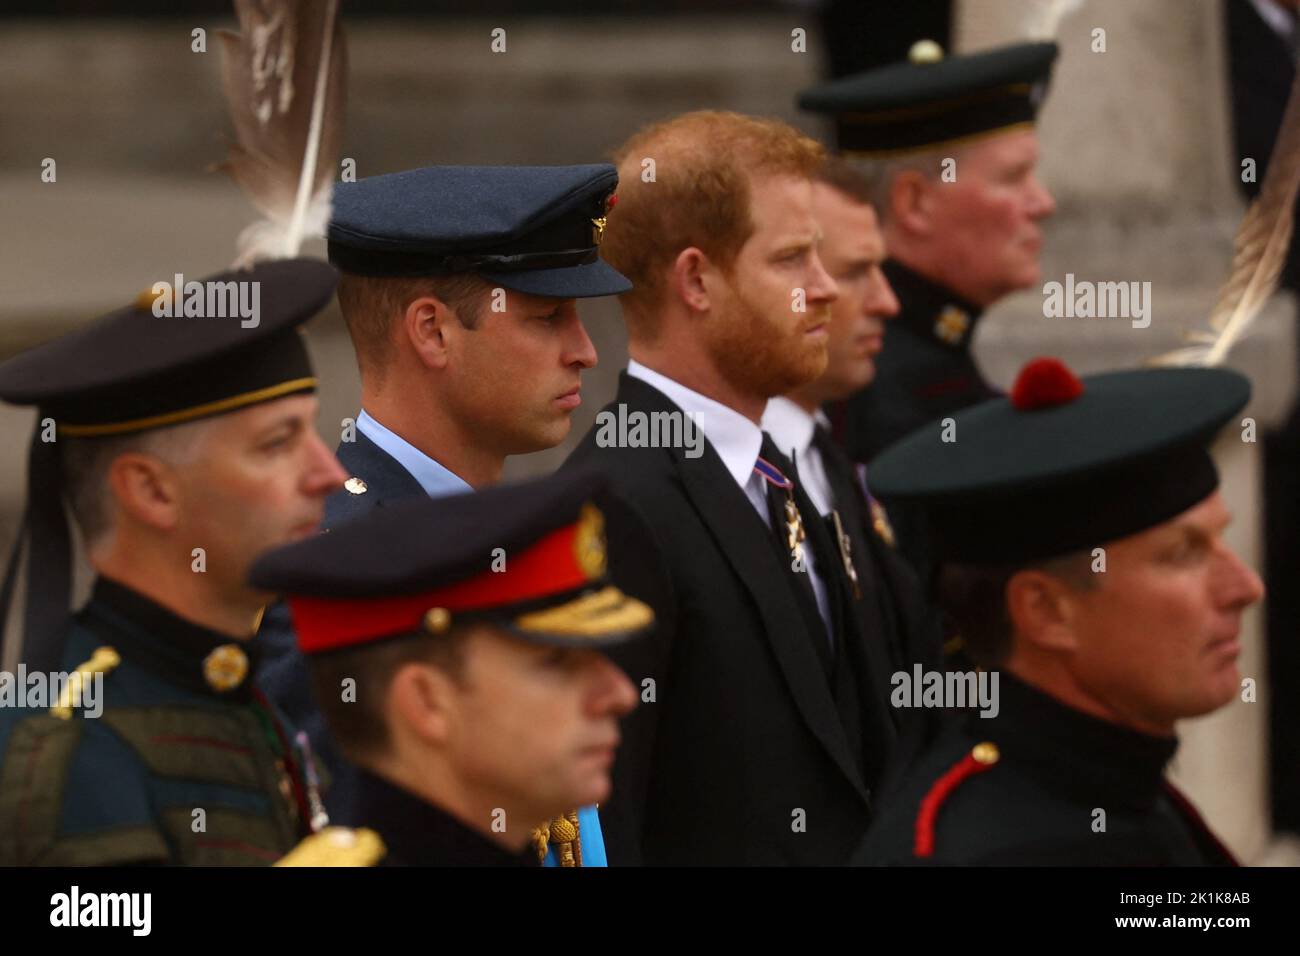 Britain's William, Prince of Wales and Britain's Prince Harry, Duke of Sussex attend the state funeral and burial of Britain's Queen Elizabeth at Westminster Abbey, in London, Britain, September 19, 2022.  REUTERS/Kai Pfaffenbach Stock Photo